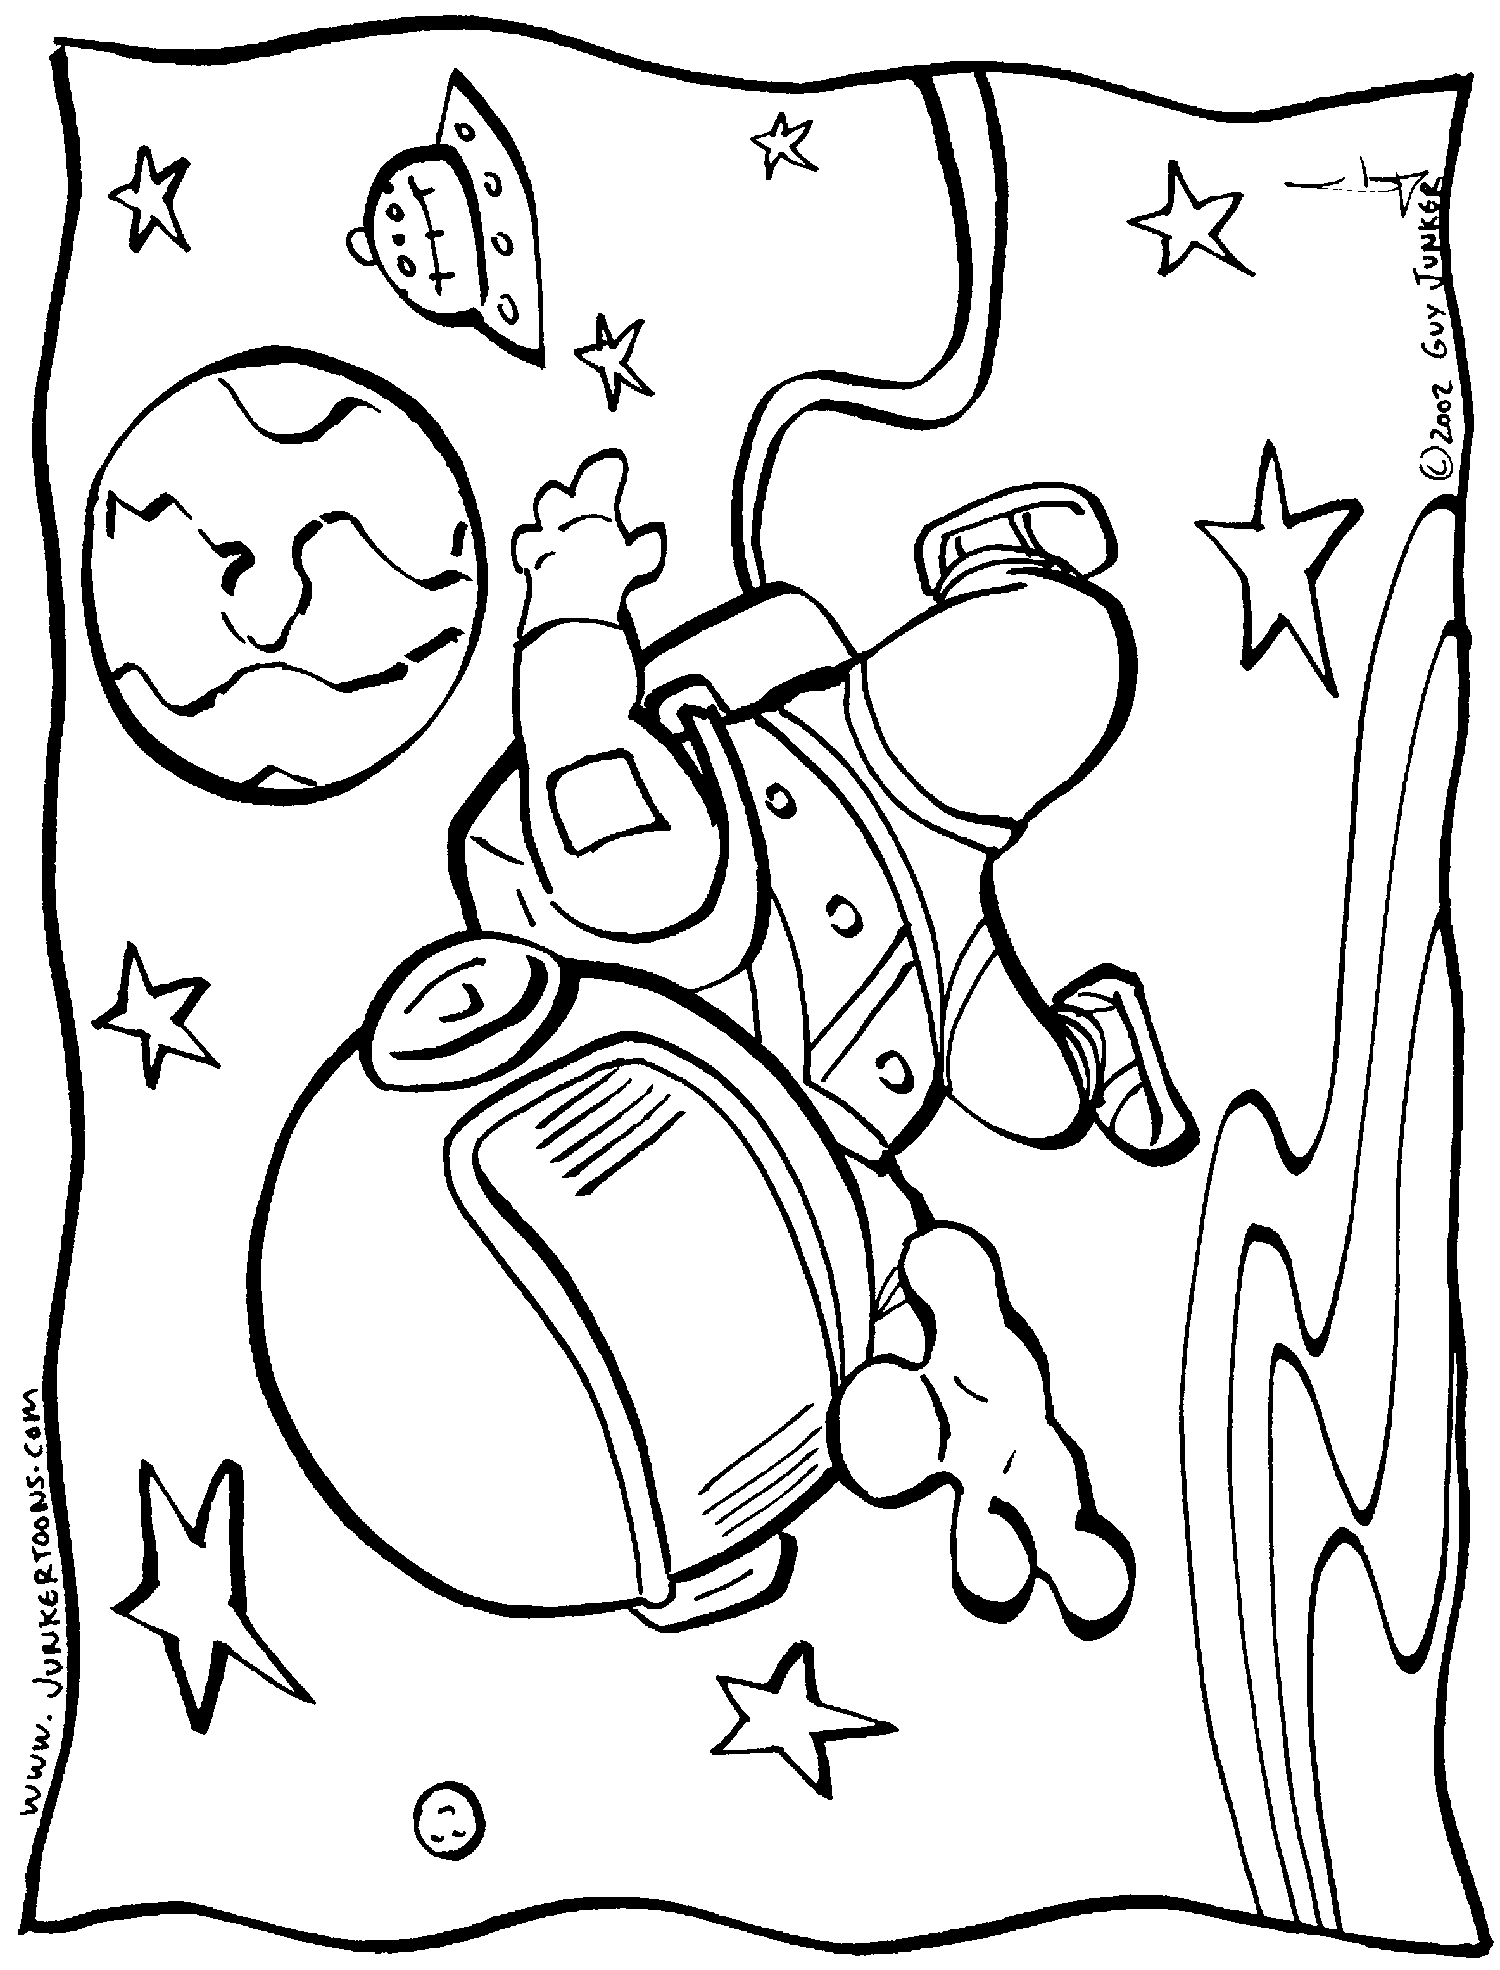 space-coloring-page-0065-q1